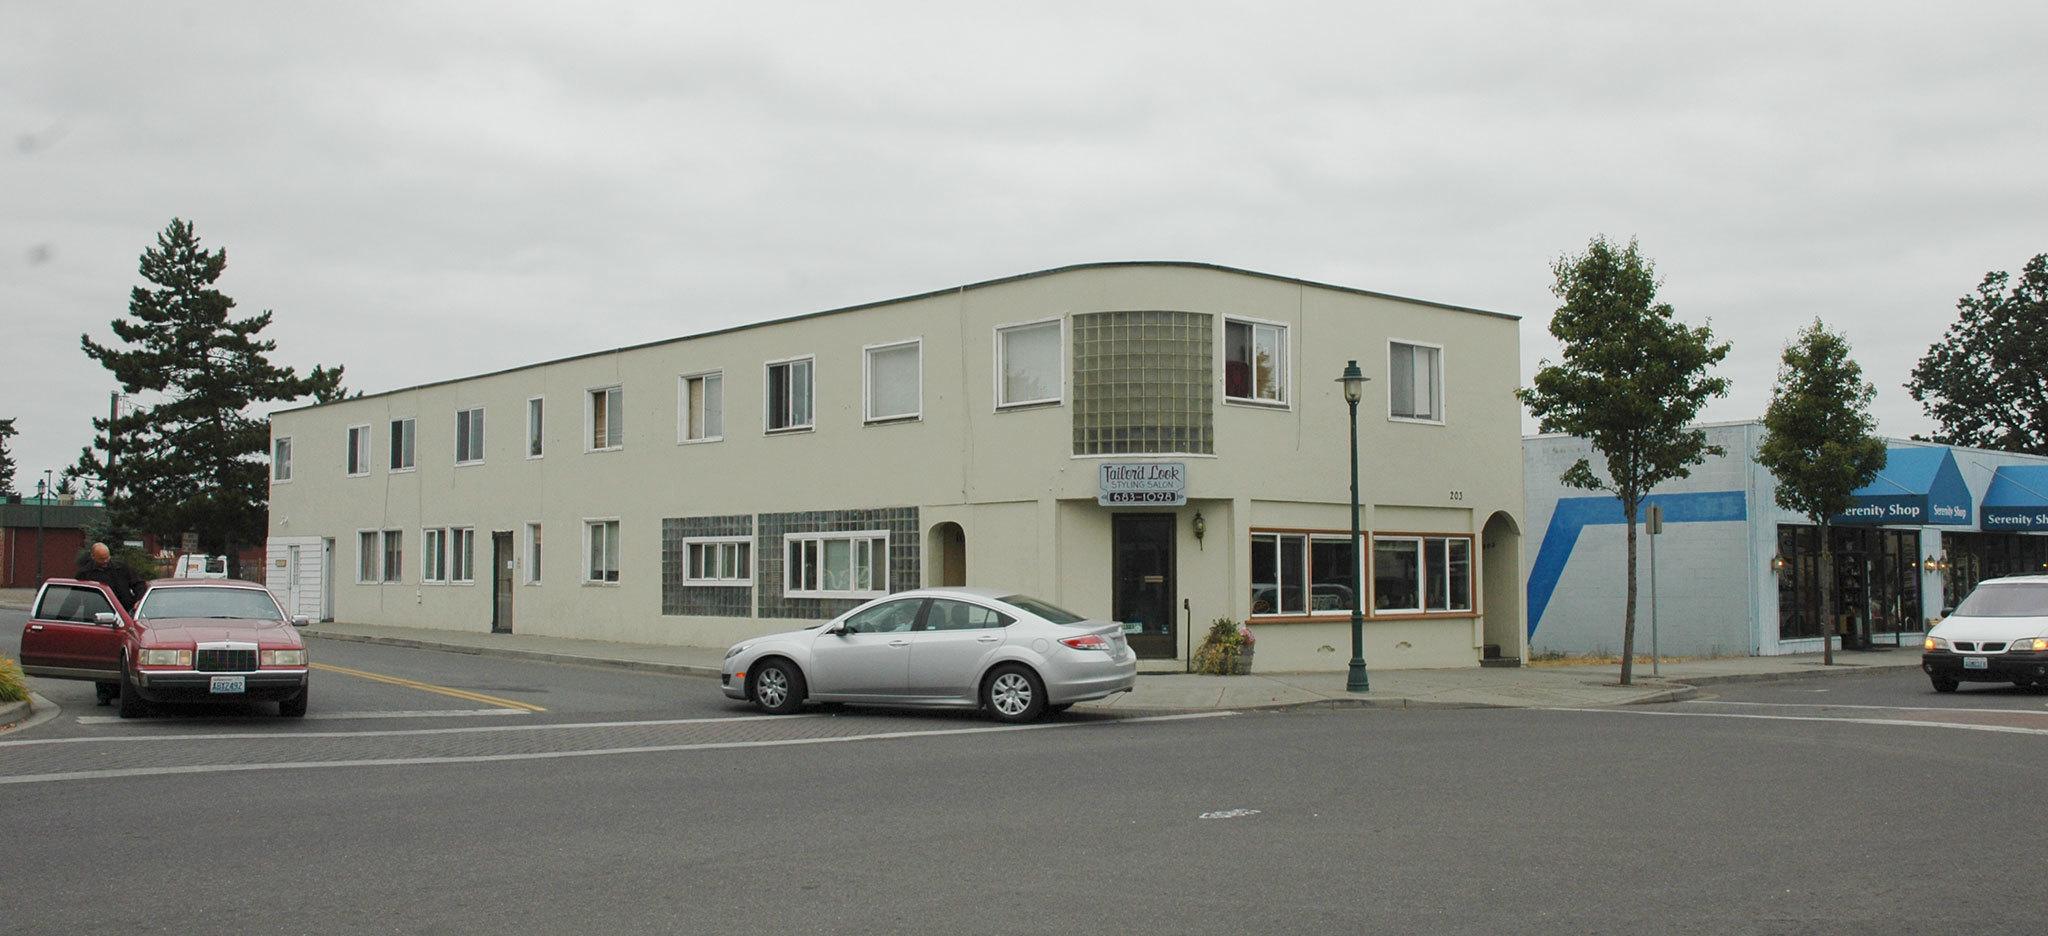 Sequim currently does not have an emergency shelter or temporary housing for homeless individuals or families. The city’s last shelter through Serenity House was located near the Serenity House housing complex. (Olympic Peninsula News Group)